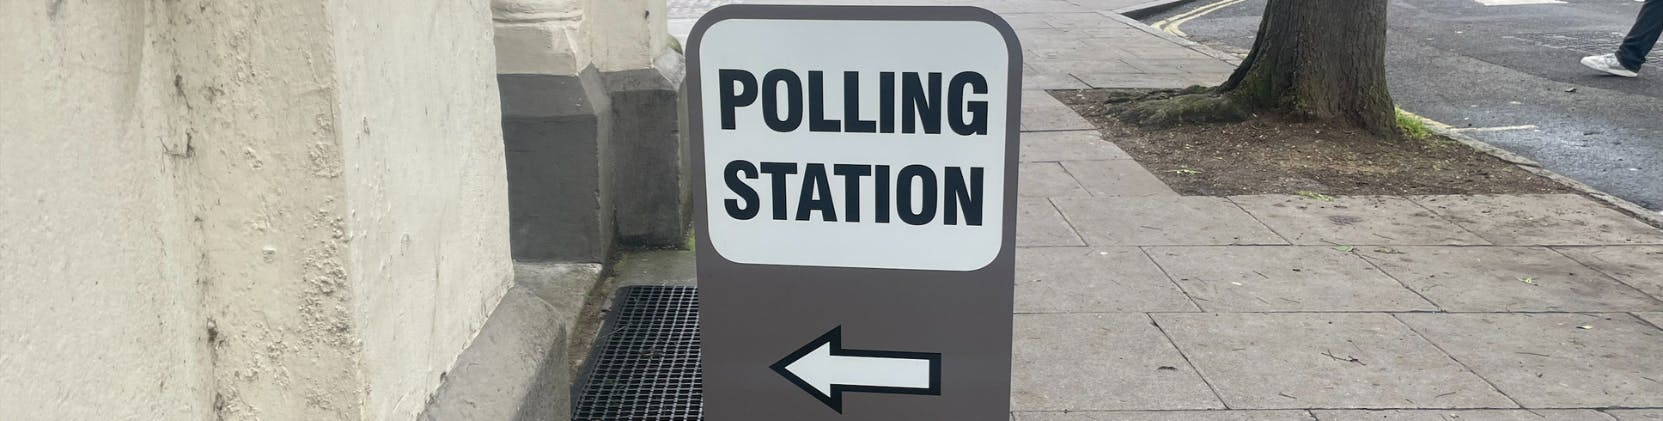 Image of polling station sign